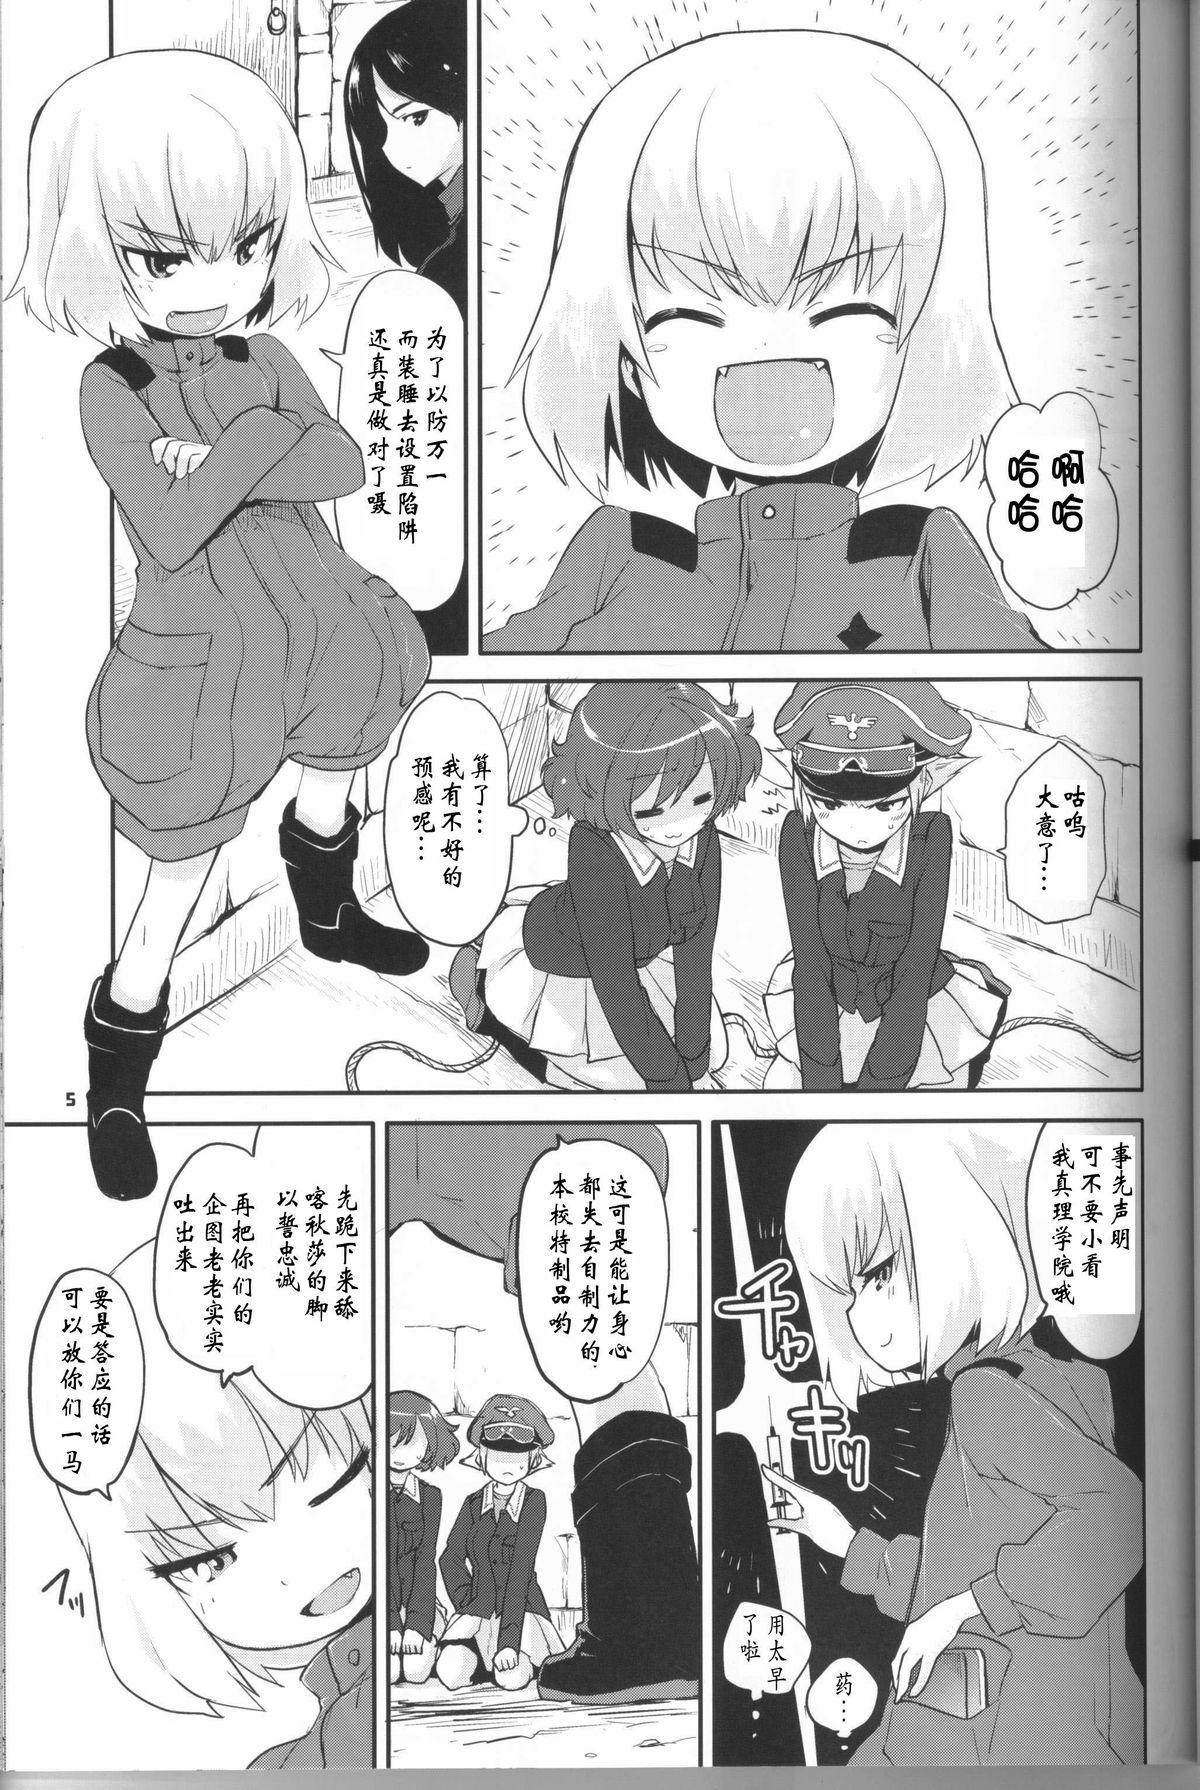 Licking The General Frost Has Come! - Girls und panzer Milk - Page 4